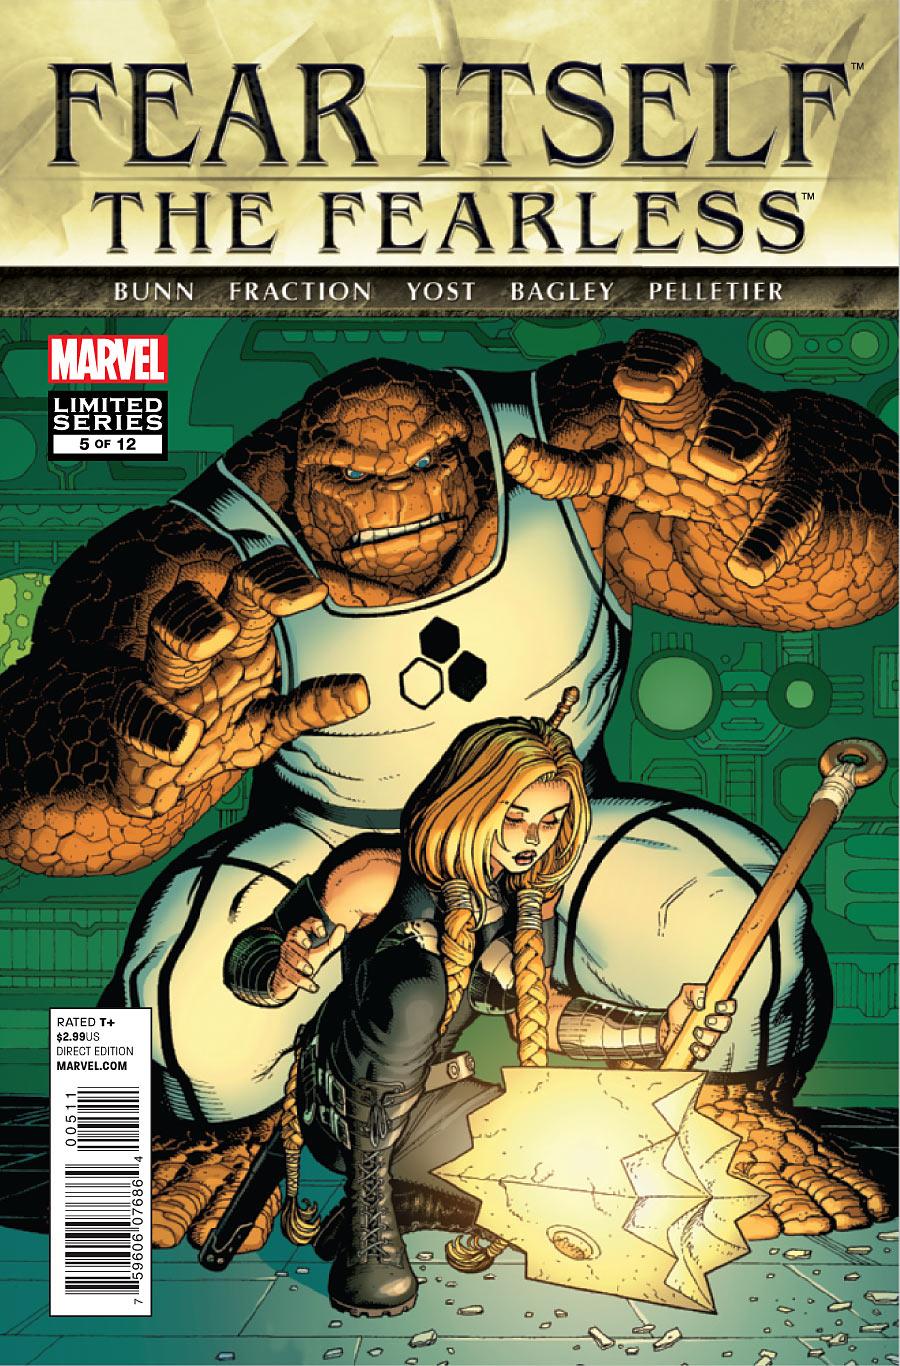 Fear Itself: The Fearless Vol. 1 #5